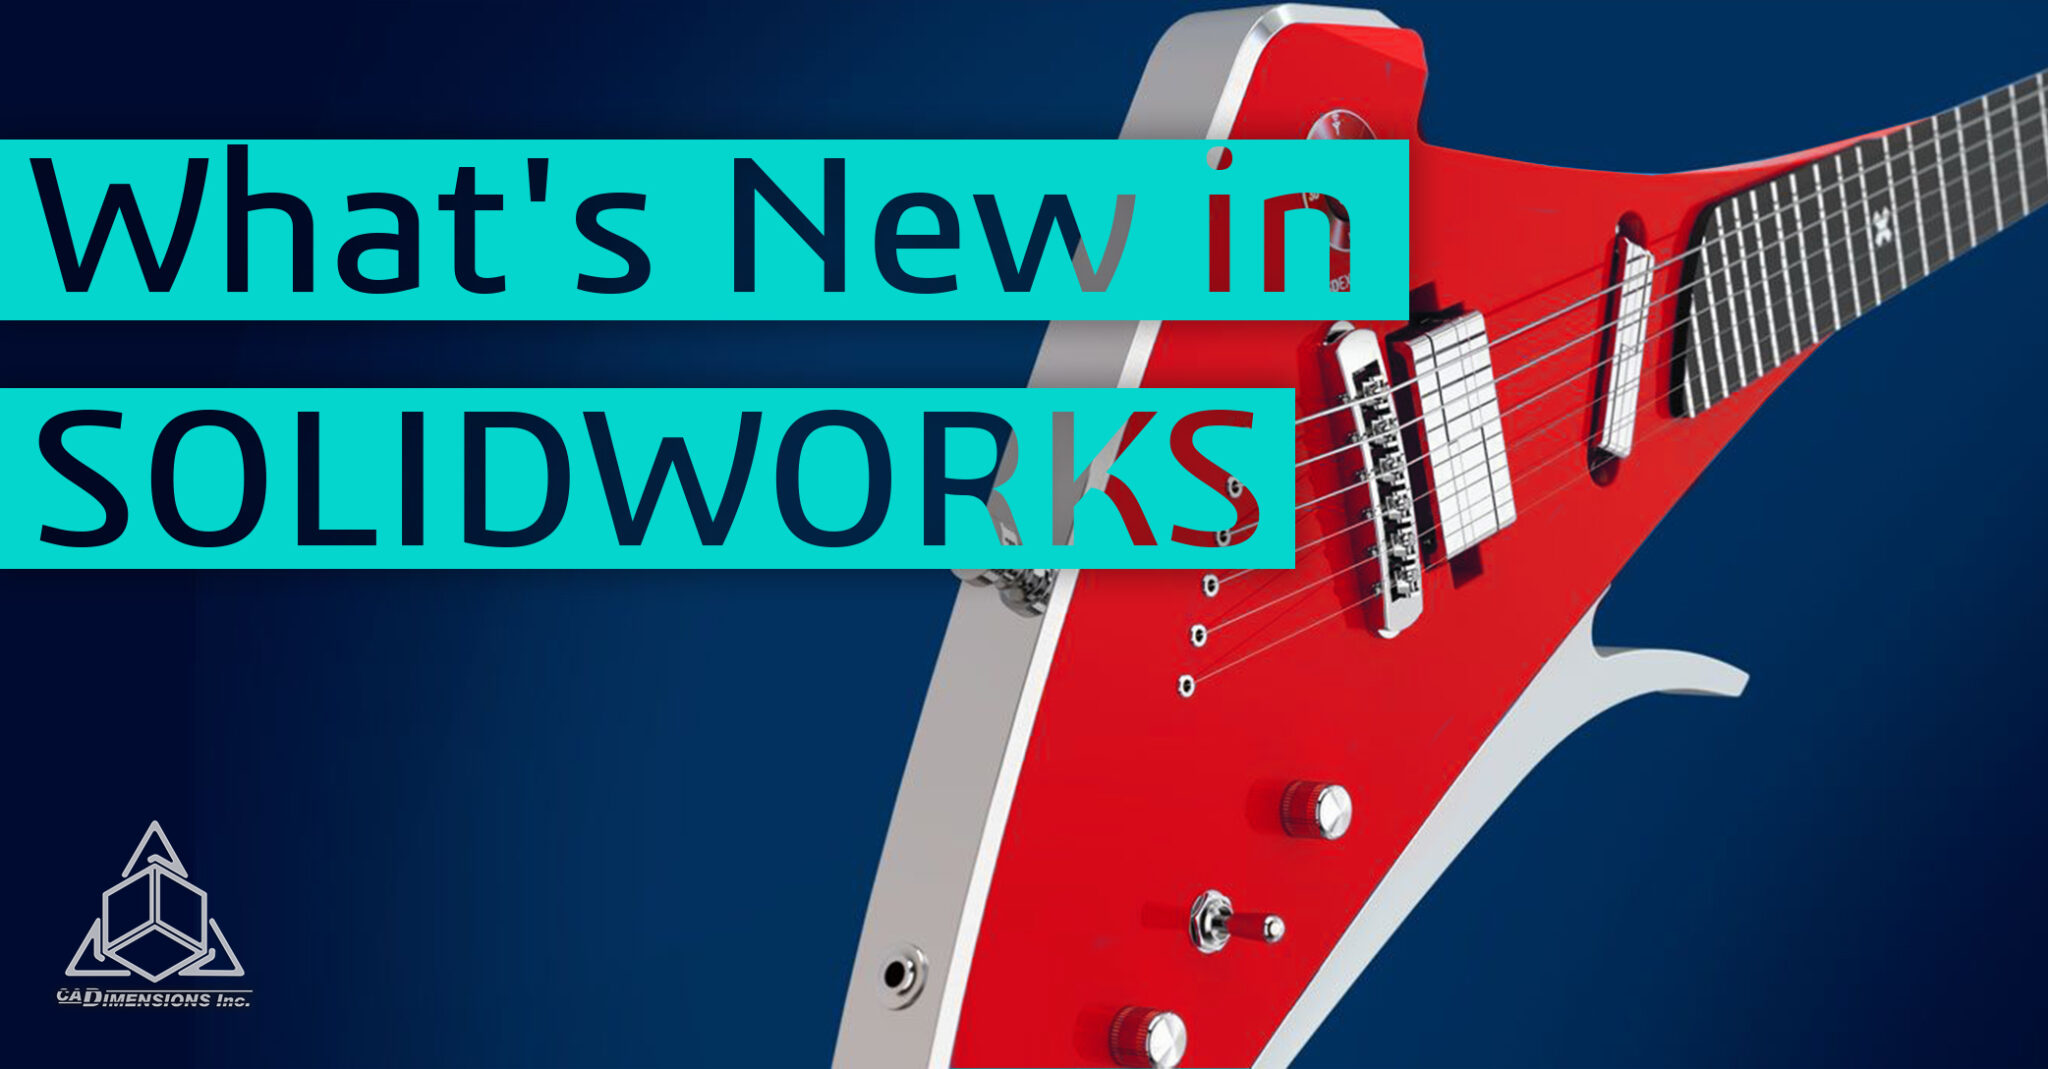 What's fresh in the 2019-2020 SOLIDWORKS Education Edition?